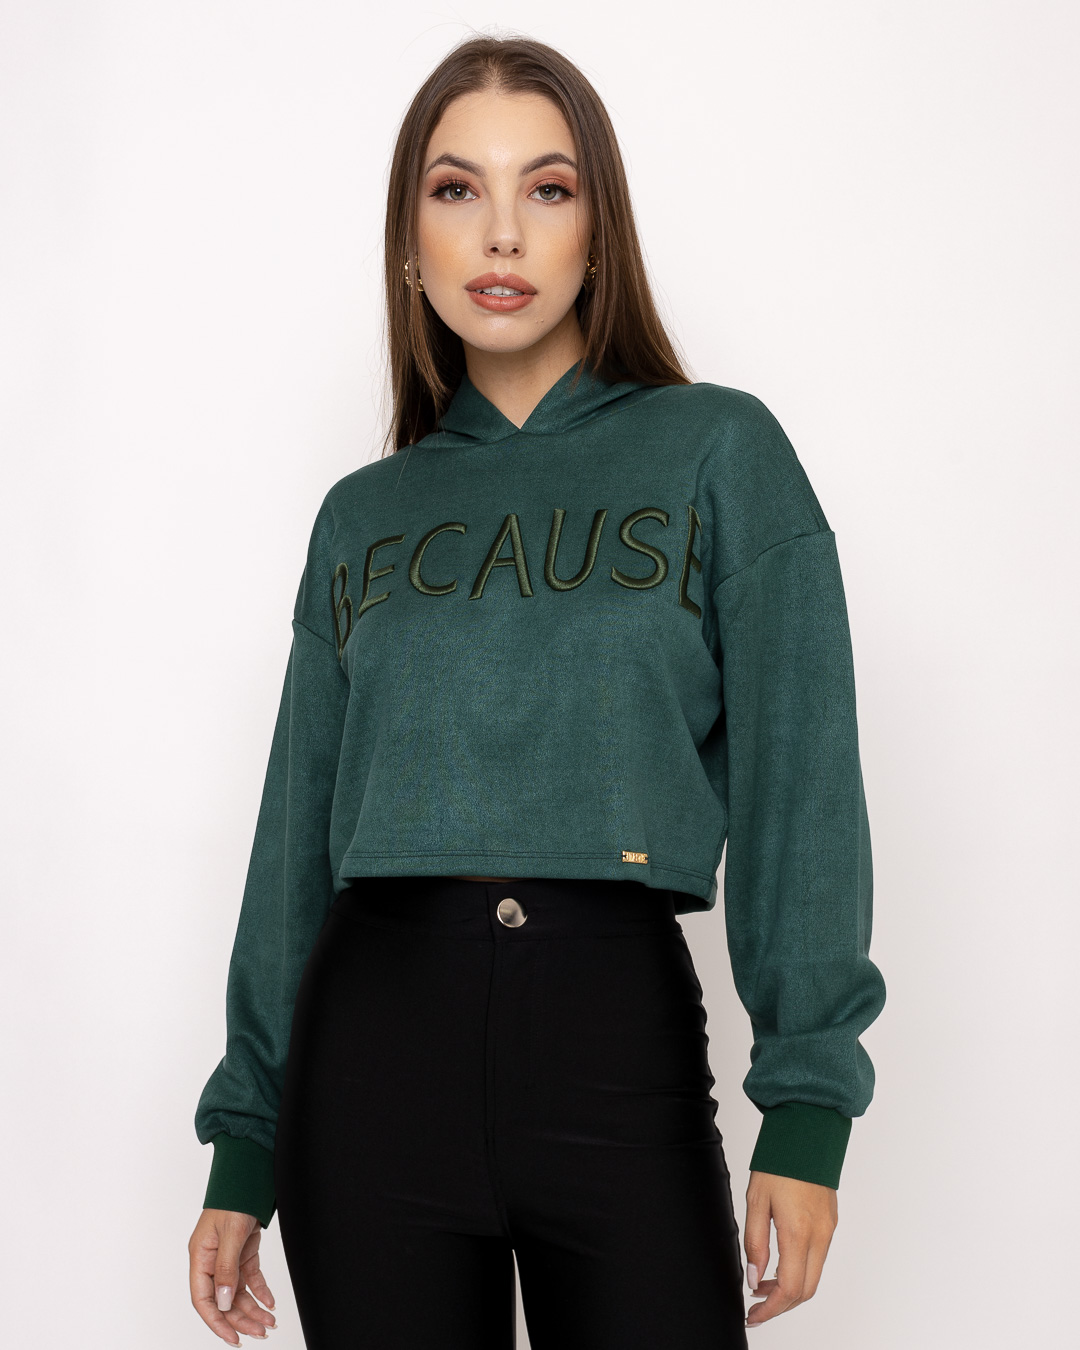 Limone - Shirt Limone Hooded Green 02-579 - 10009595